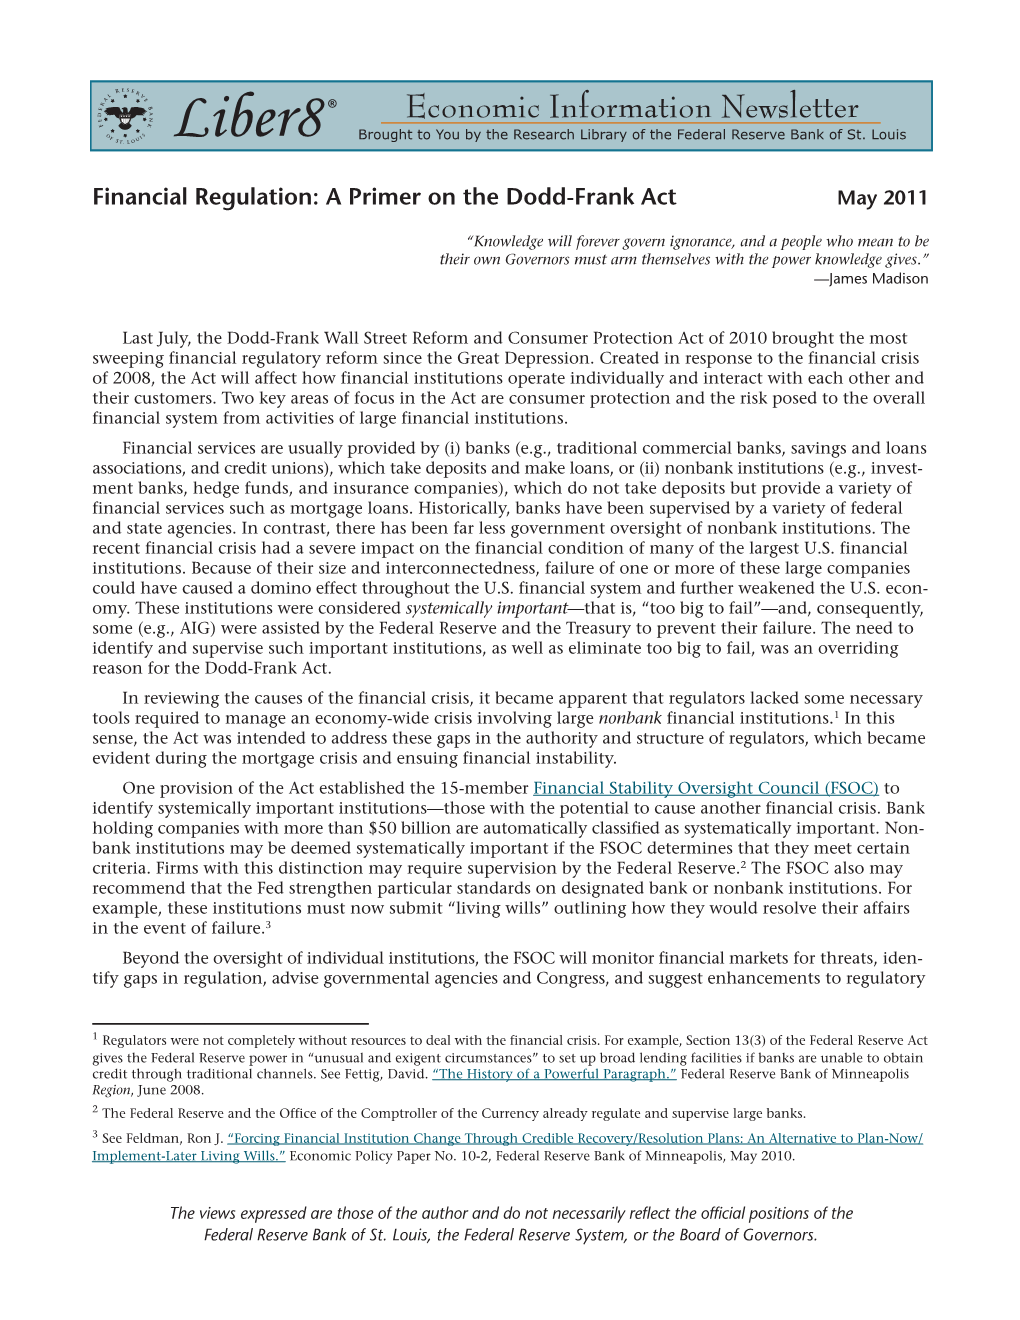 Financial Regulation: a Primer on the Dodd-Frank Act May 2011